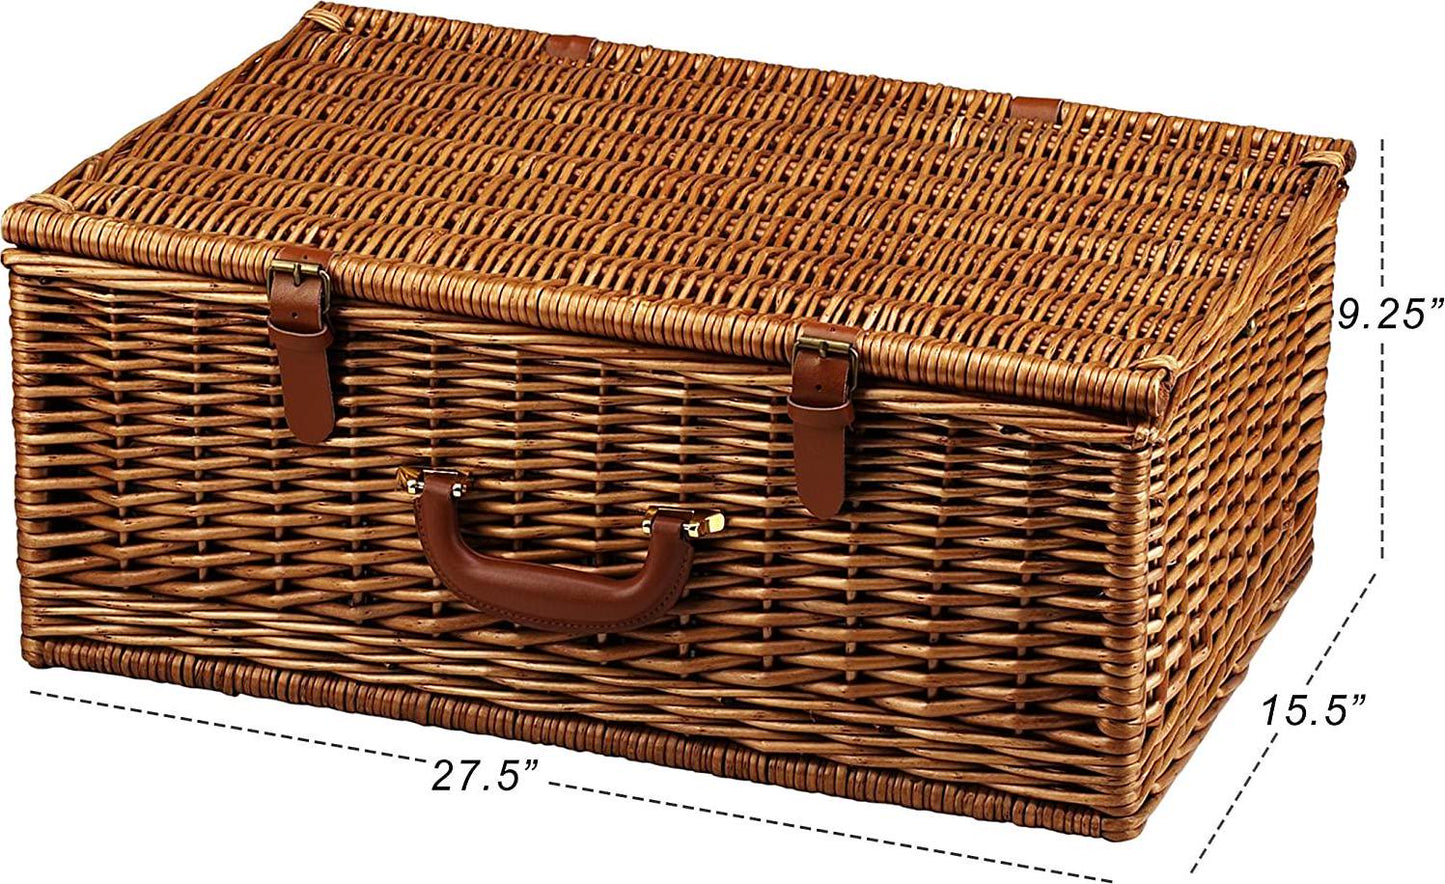 Picnic at Ascot Original Dorset English-Style Willow Picnic Basket with Service for 4 and Blanket- Designed